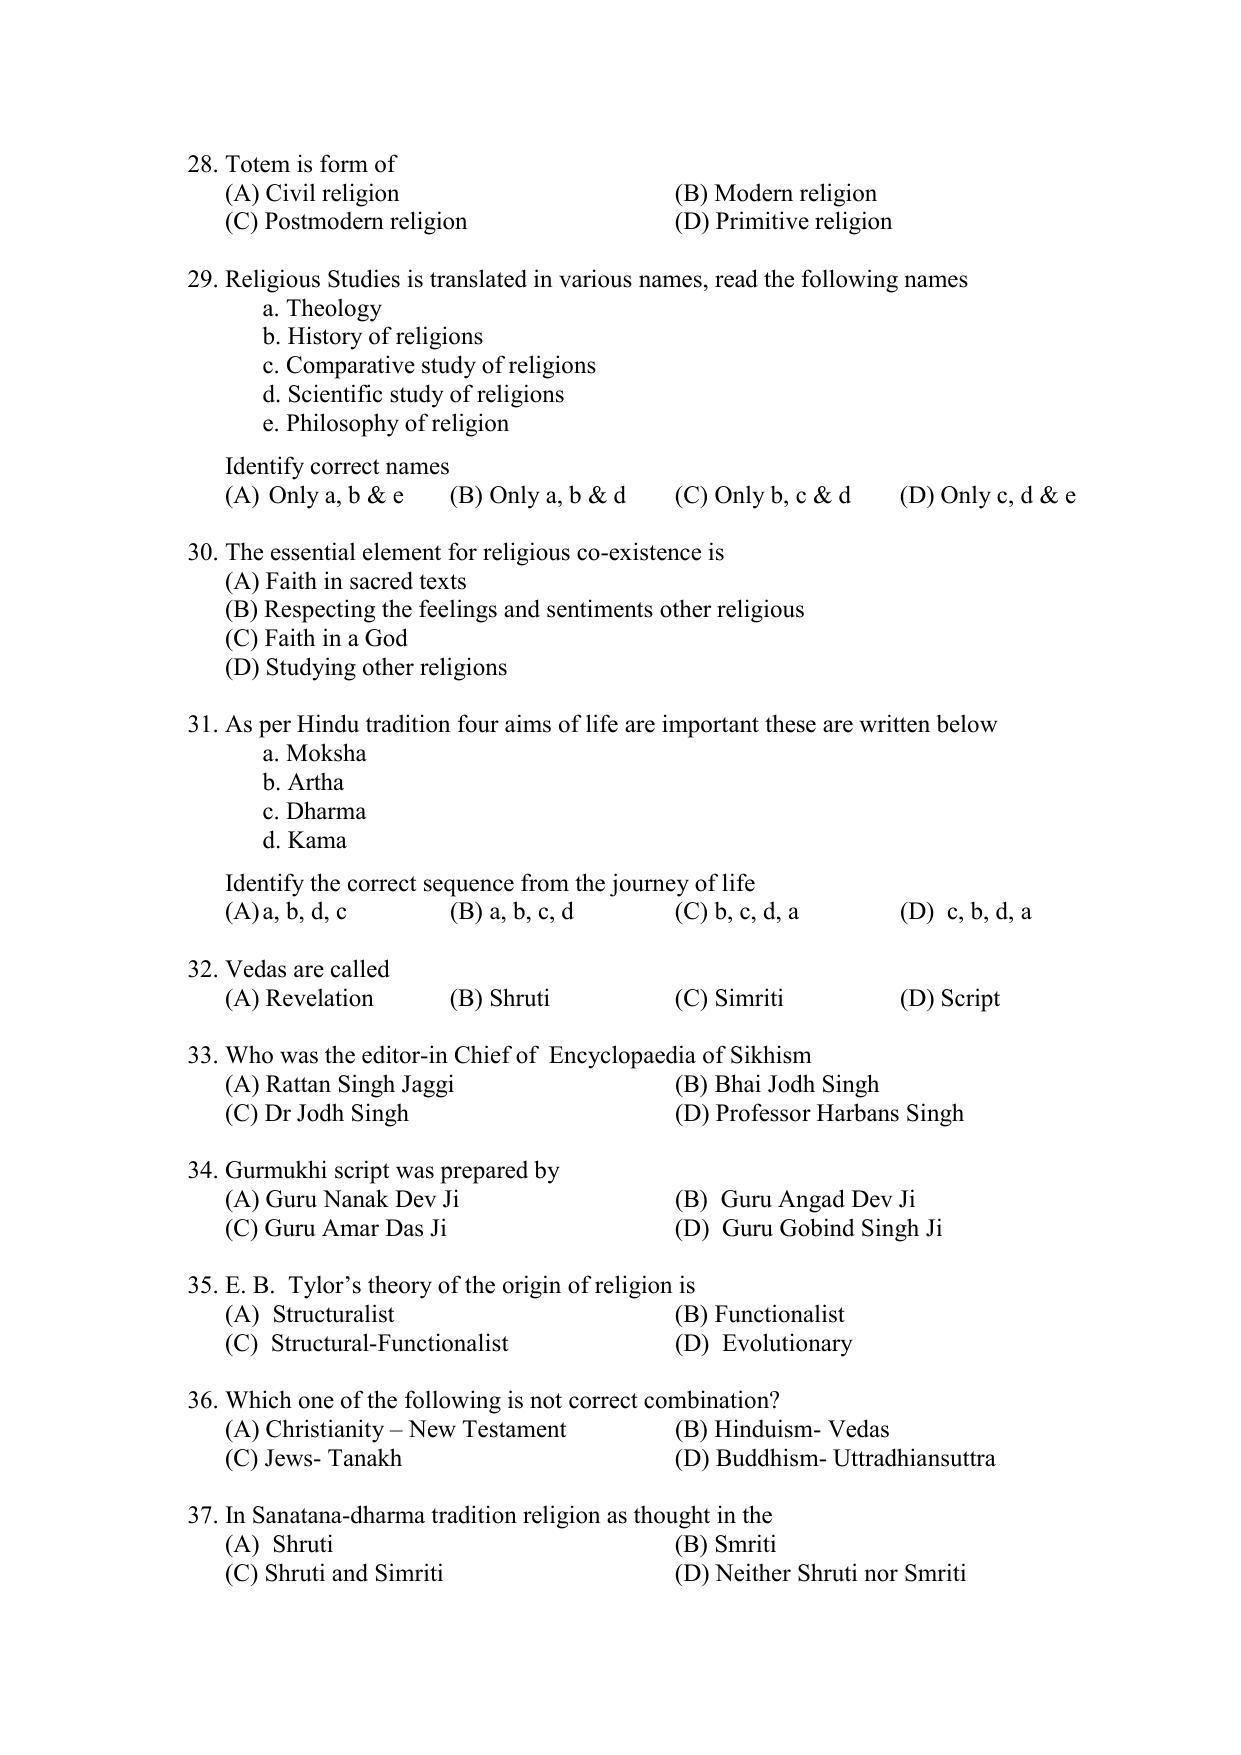 PU MPET Ancient Indian History & Archeology 2022 Question Papers - Page 56